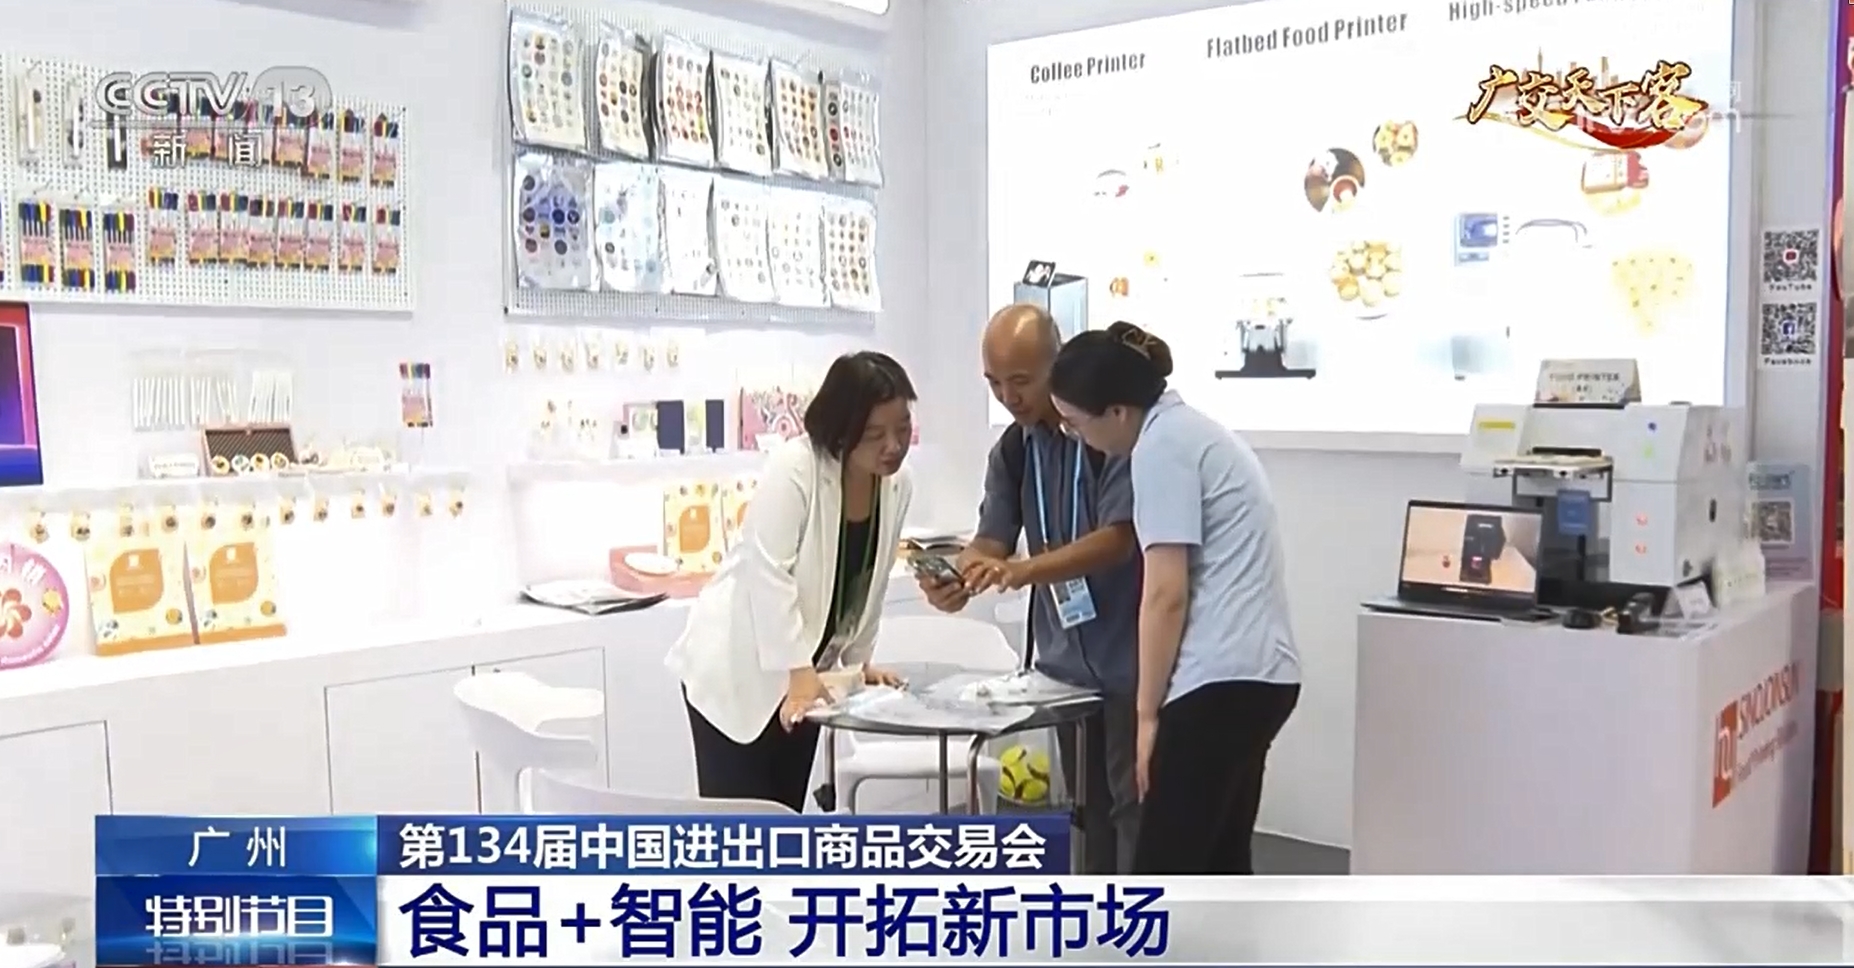 Media coverage by CCTV on the 134th Canton Fair